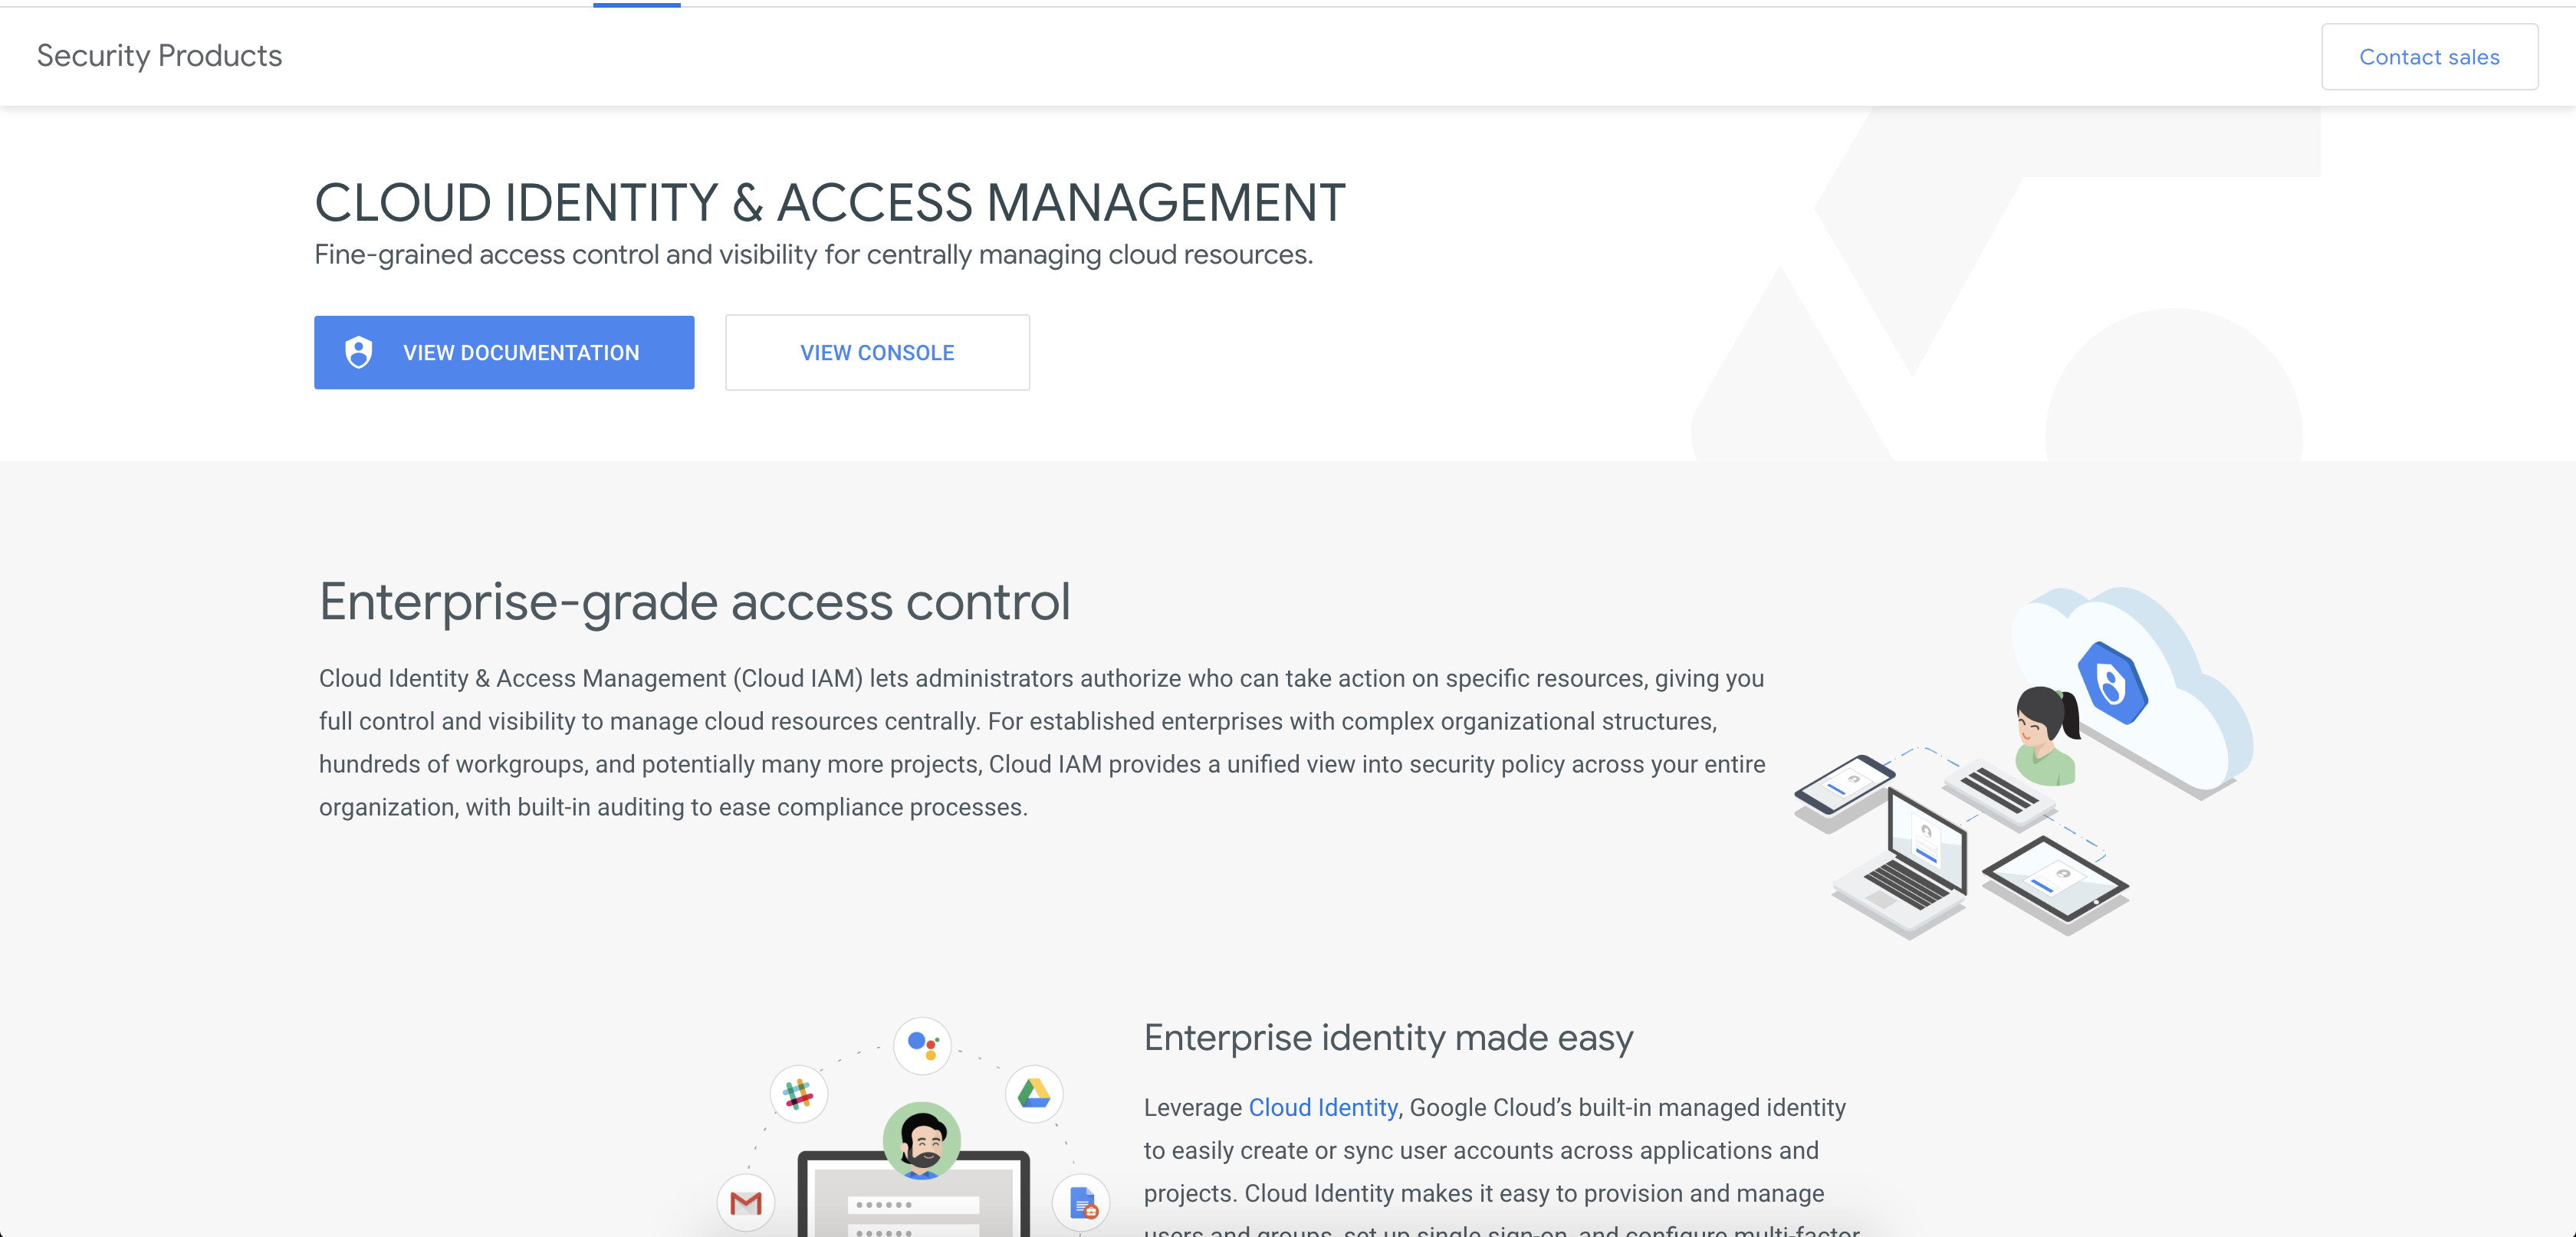 Screenshot of the Security Products page in Google Cloud.